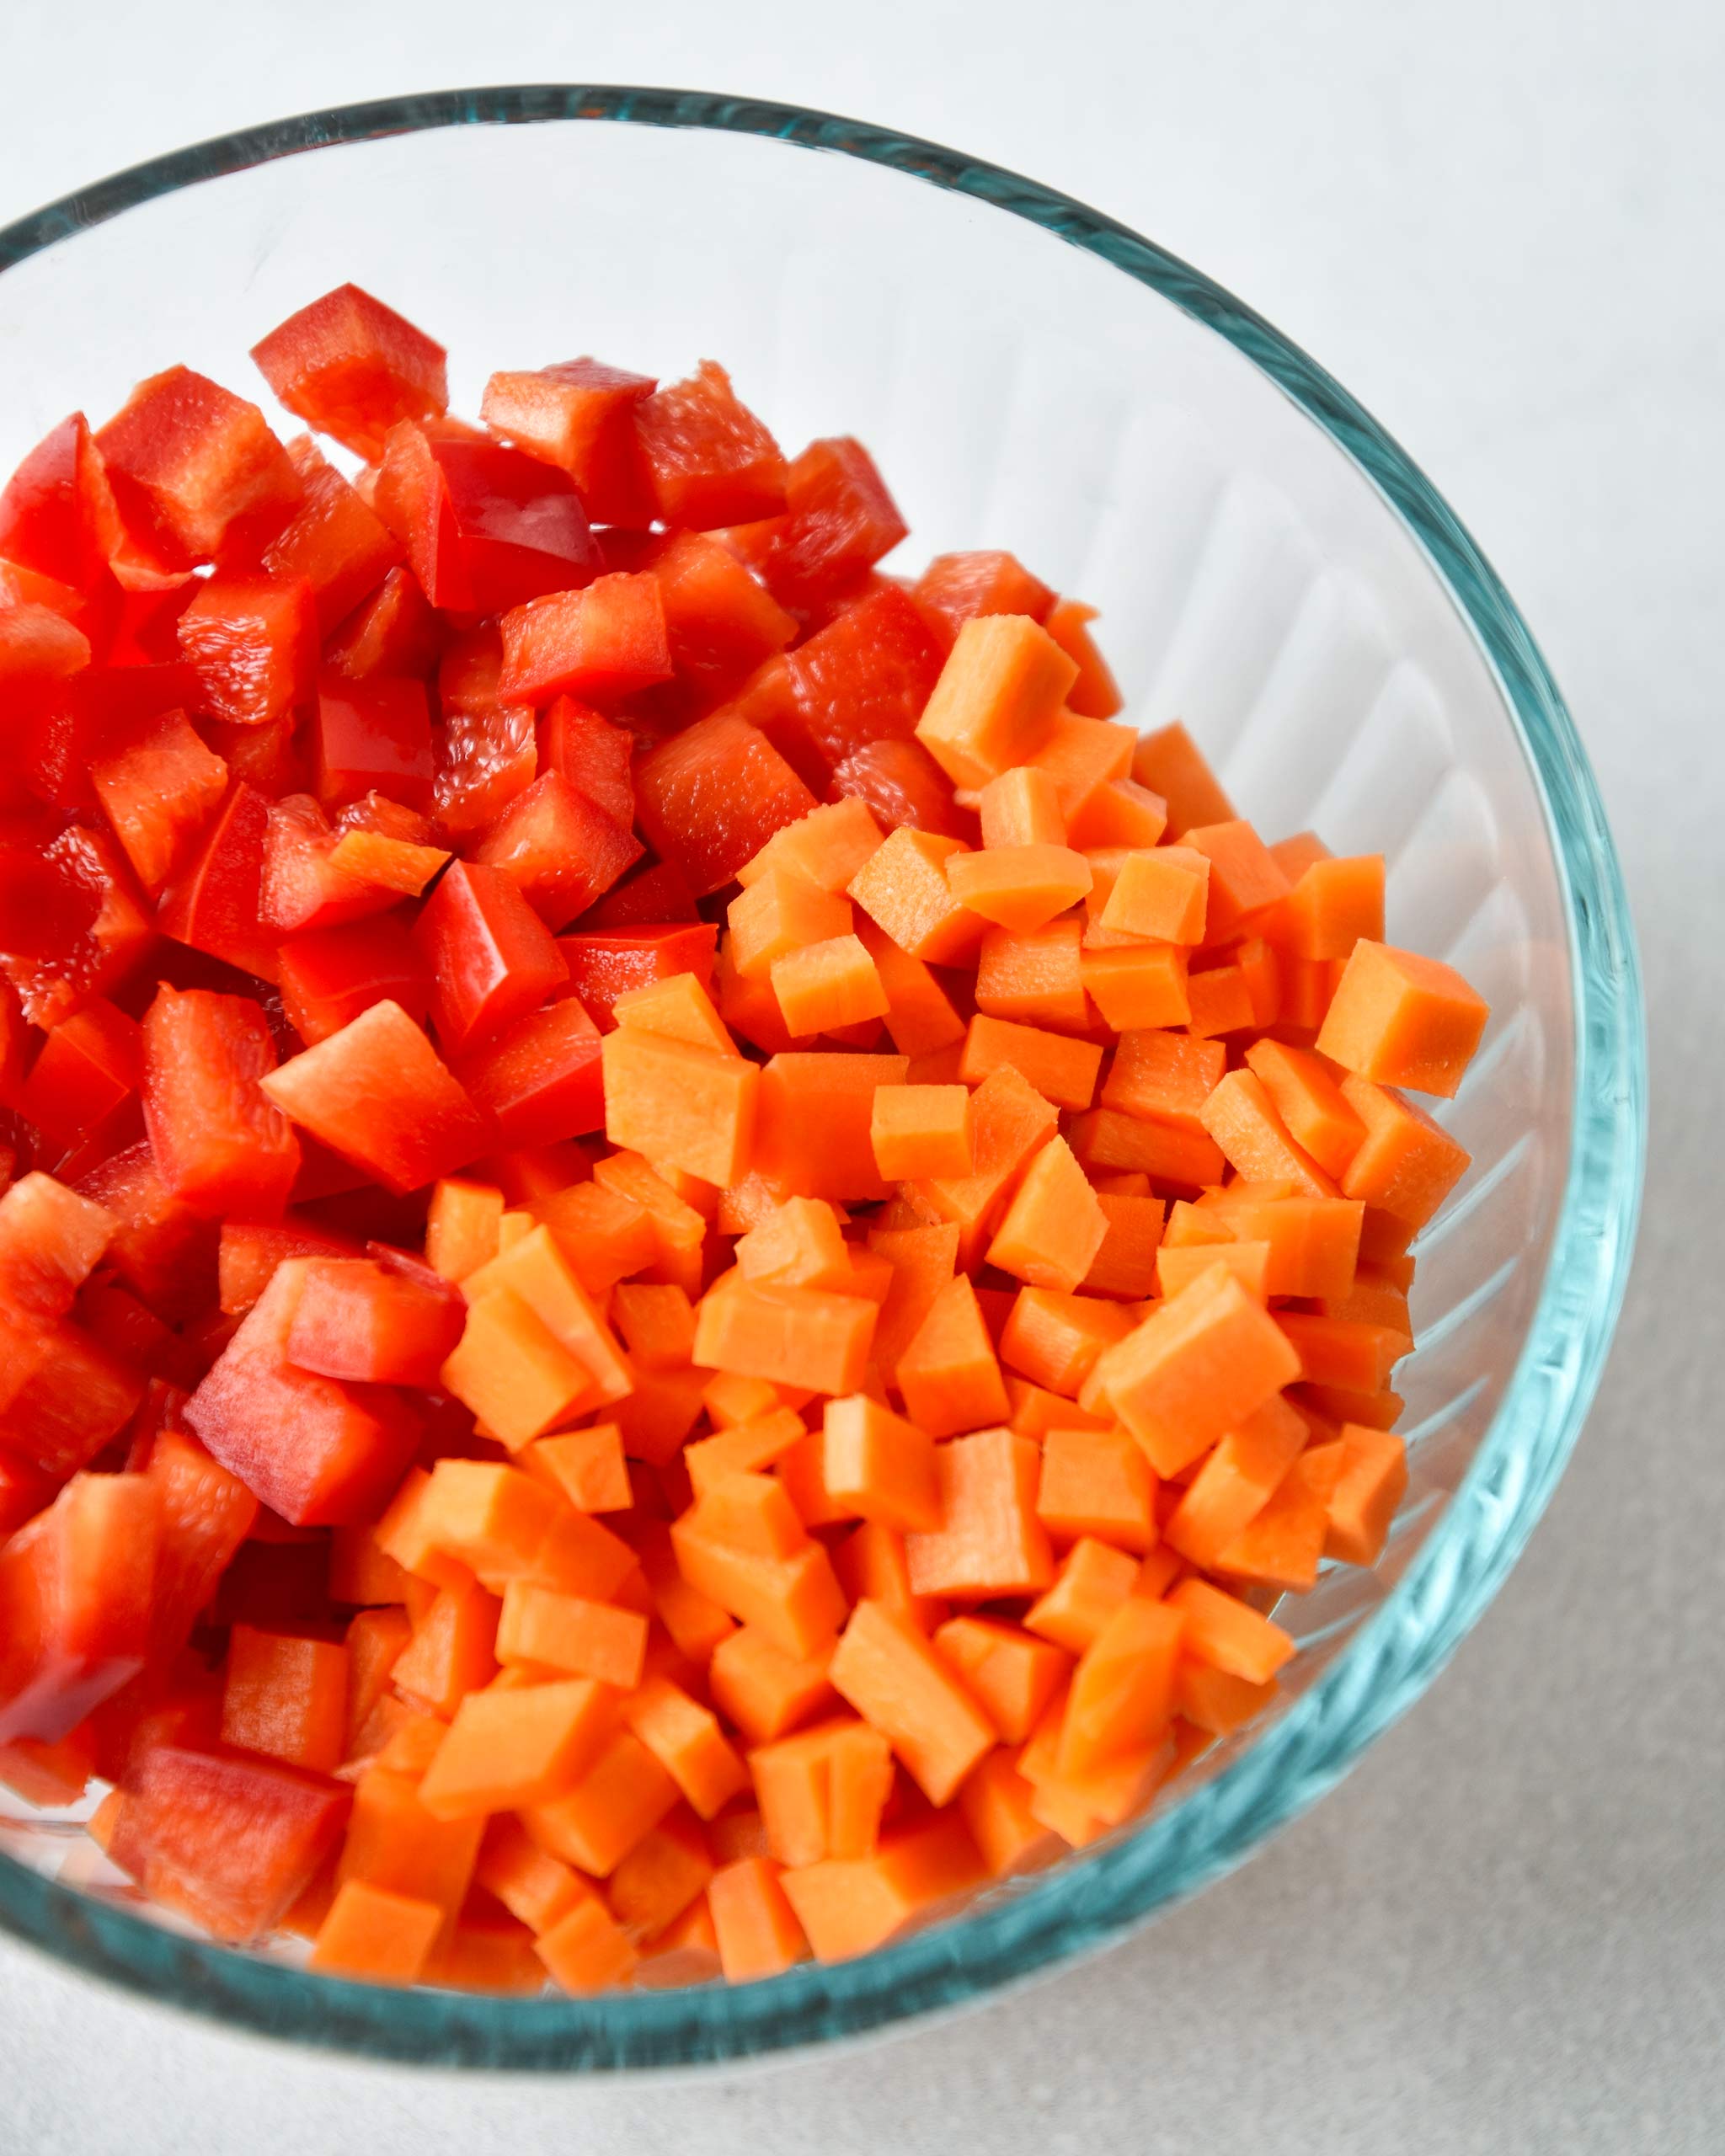 red bell peppers and carrots chopped up for the recipe